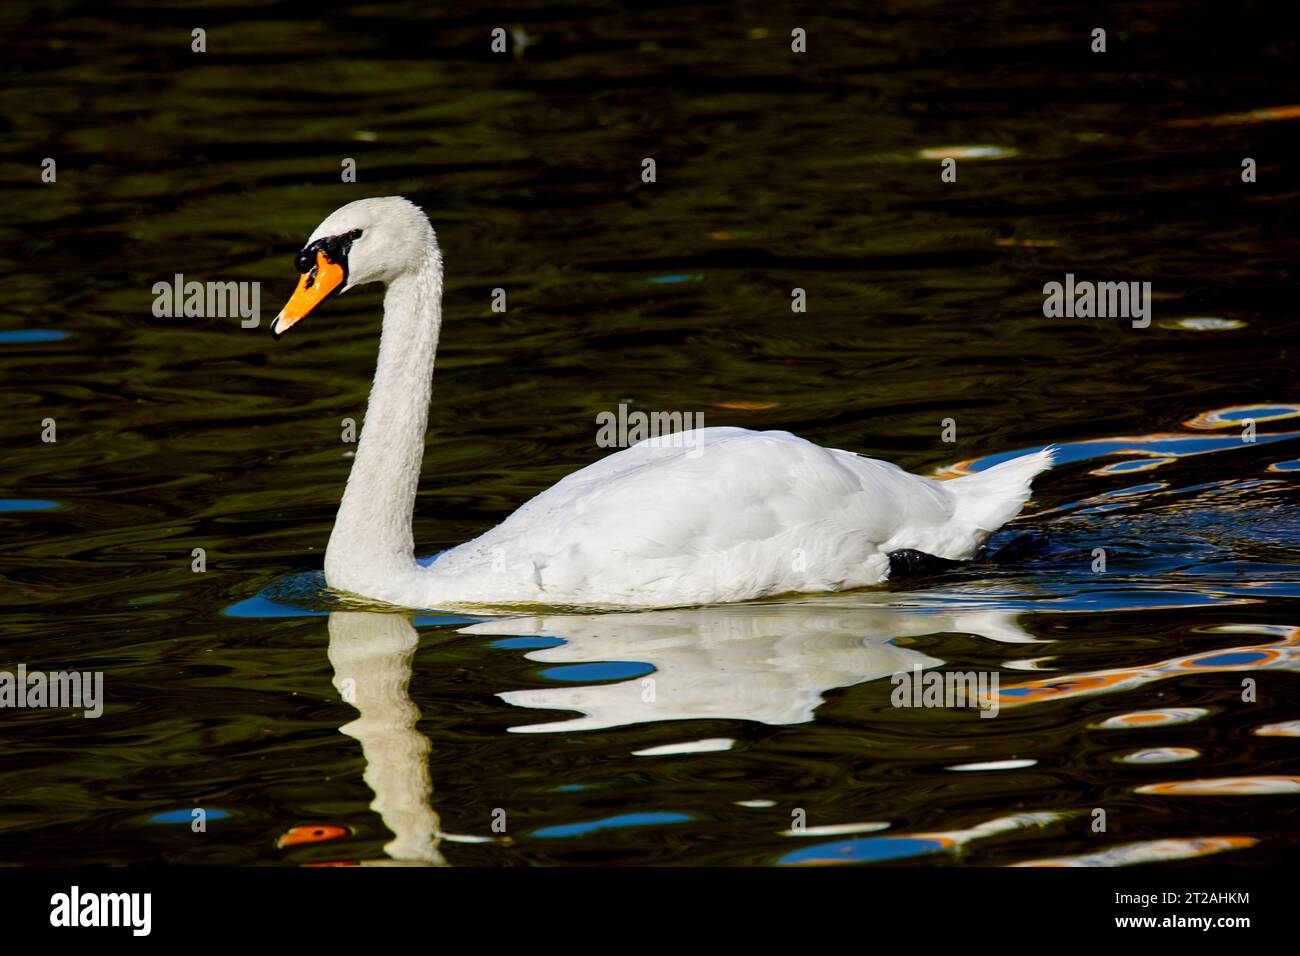 Image of a beautiful white swan swimming on the water Stock Photo